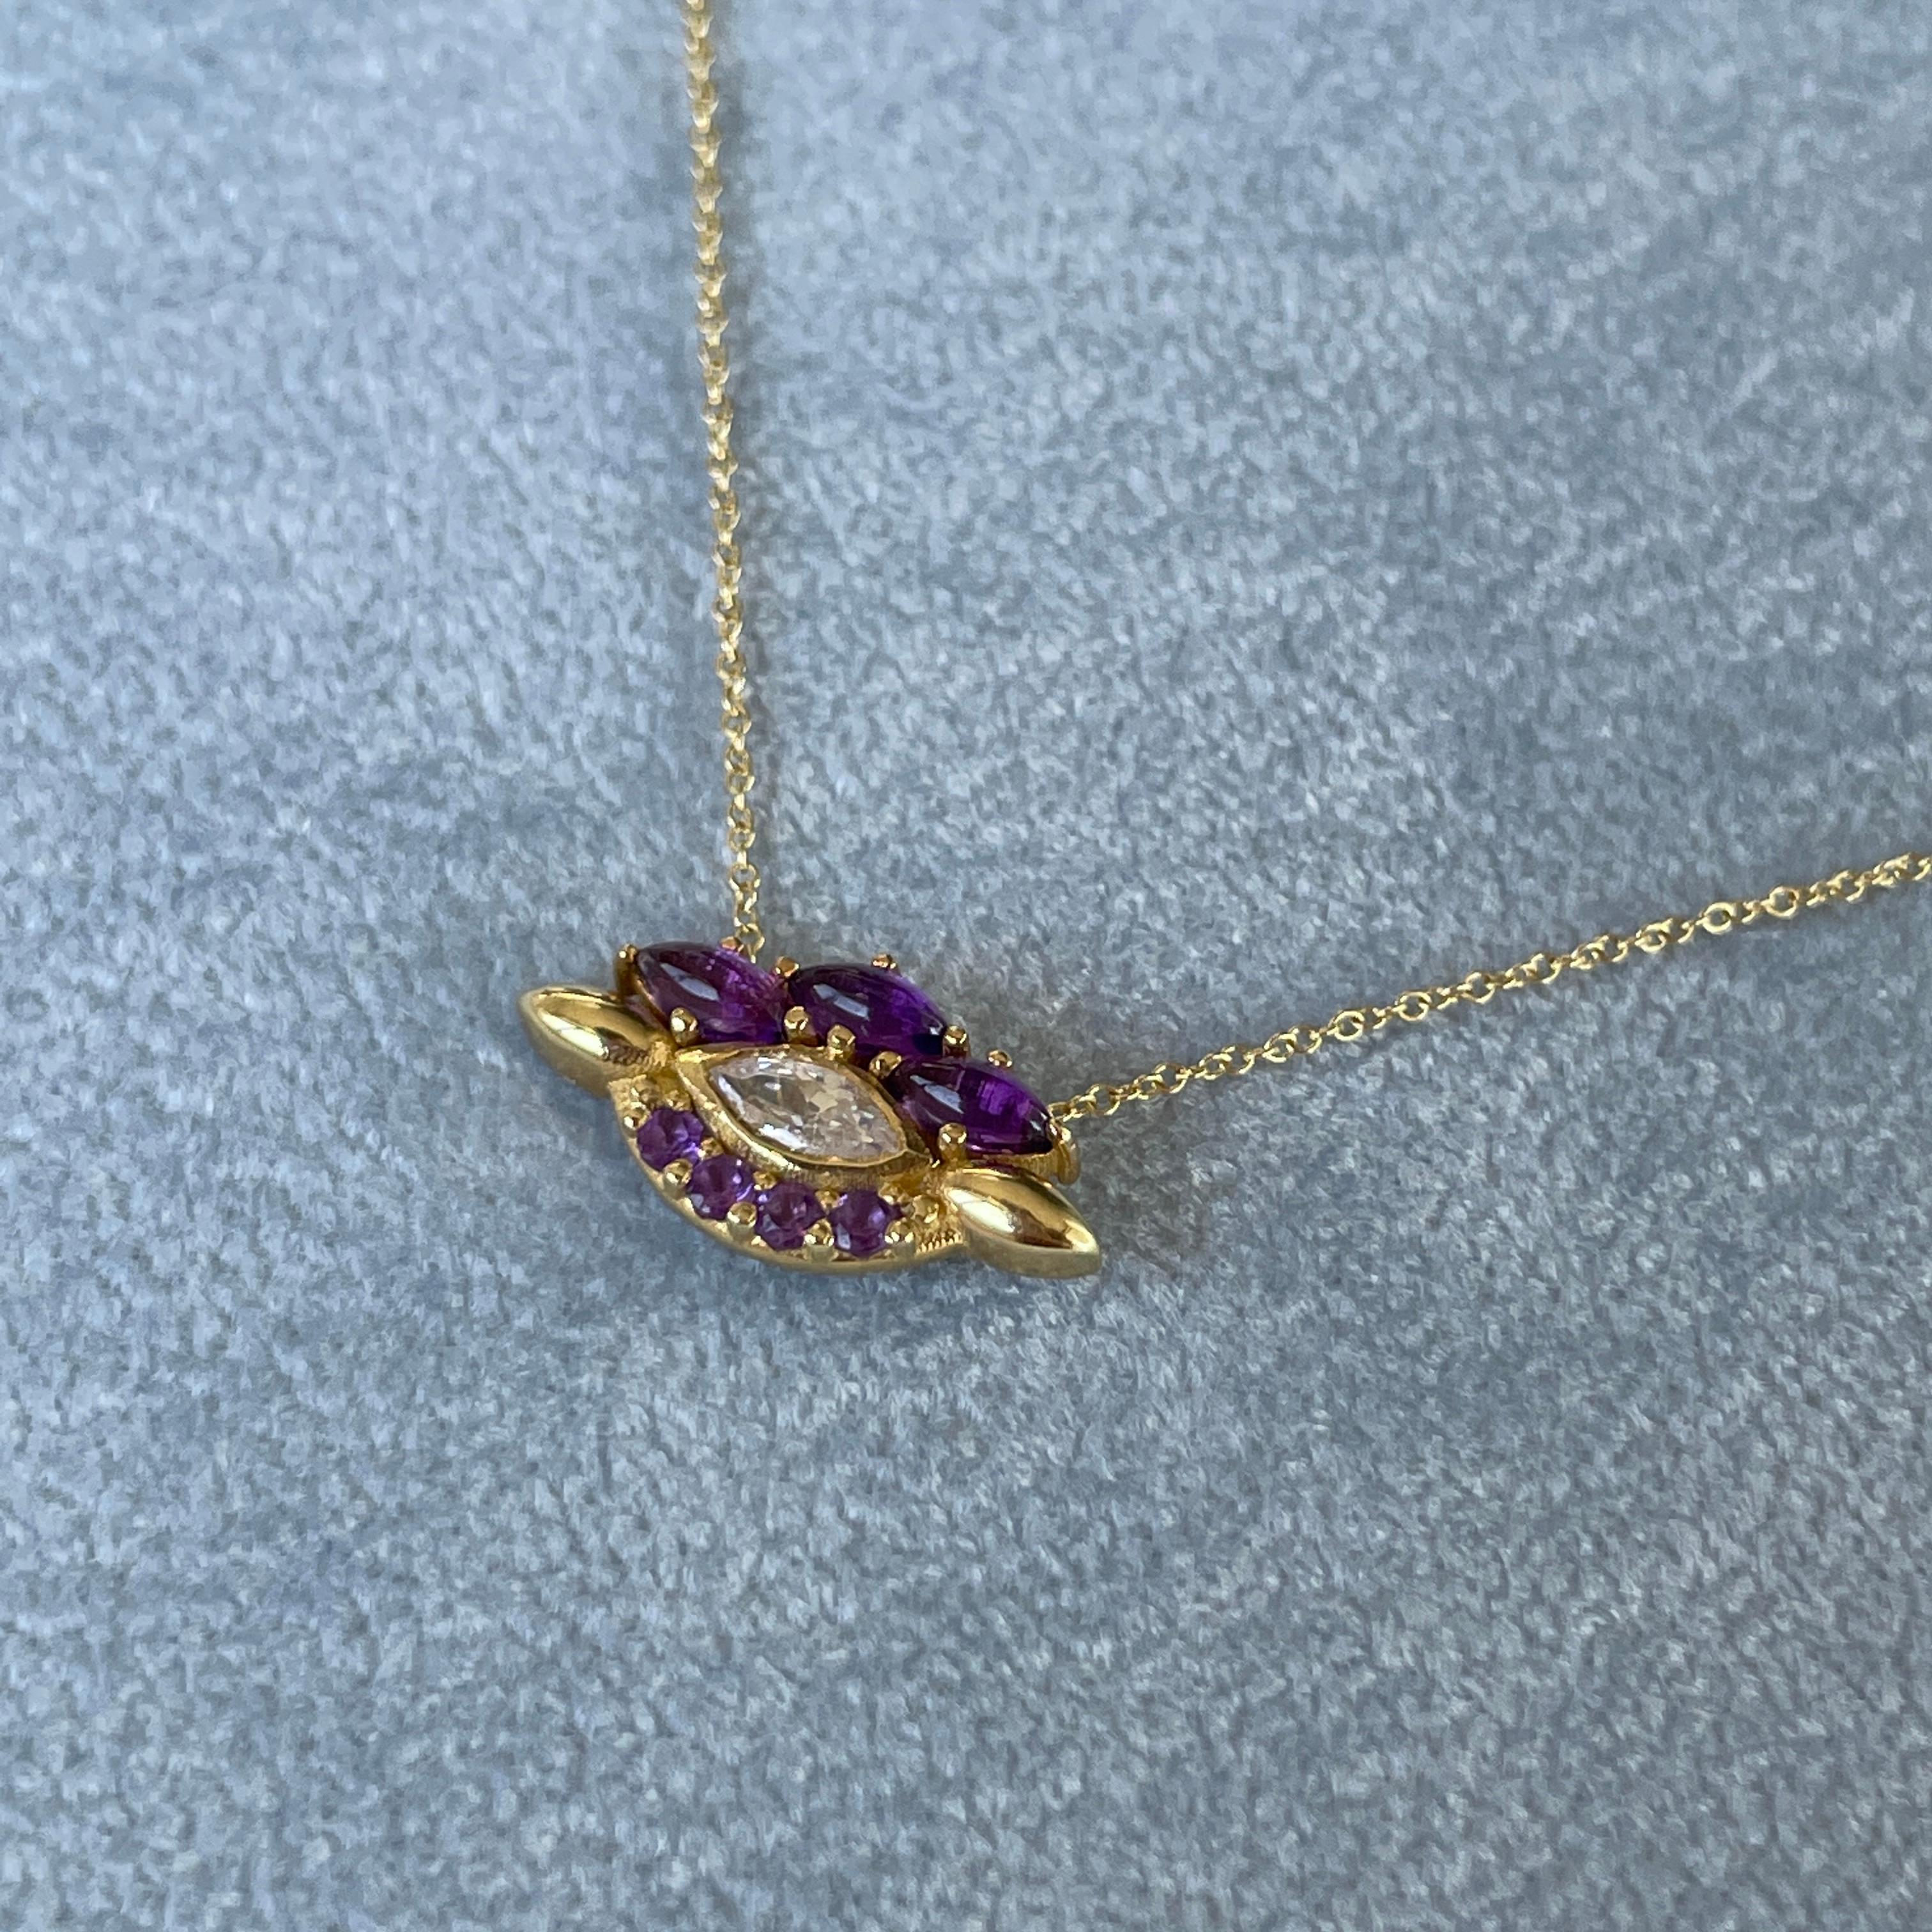 Contemporary Eye Pendant in 18 Karat Yellow Gold With A Pear Shaped Diamond And Amethysts For Sale